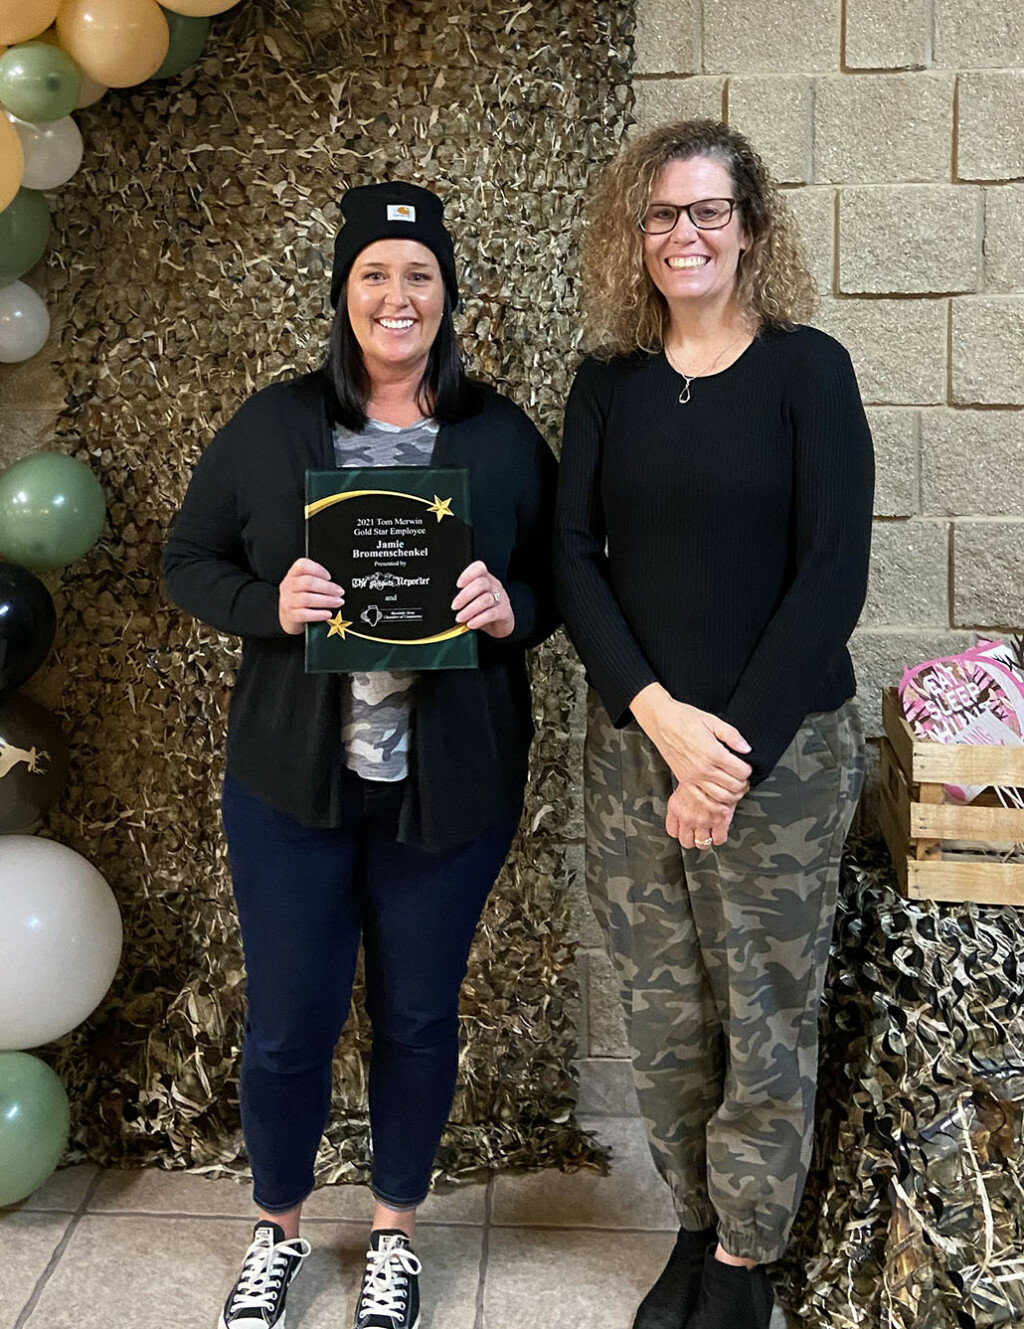 Jamie Bromenschenkel, left, accepts the Tom Merwin Gold Star Employee Award from Jenn Masini, Chair of the Board of the Mendota Area Chamber of Commerce. (Photo contributed)